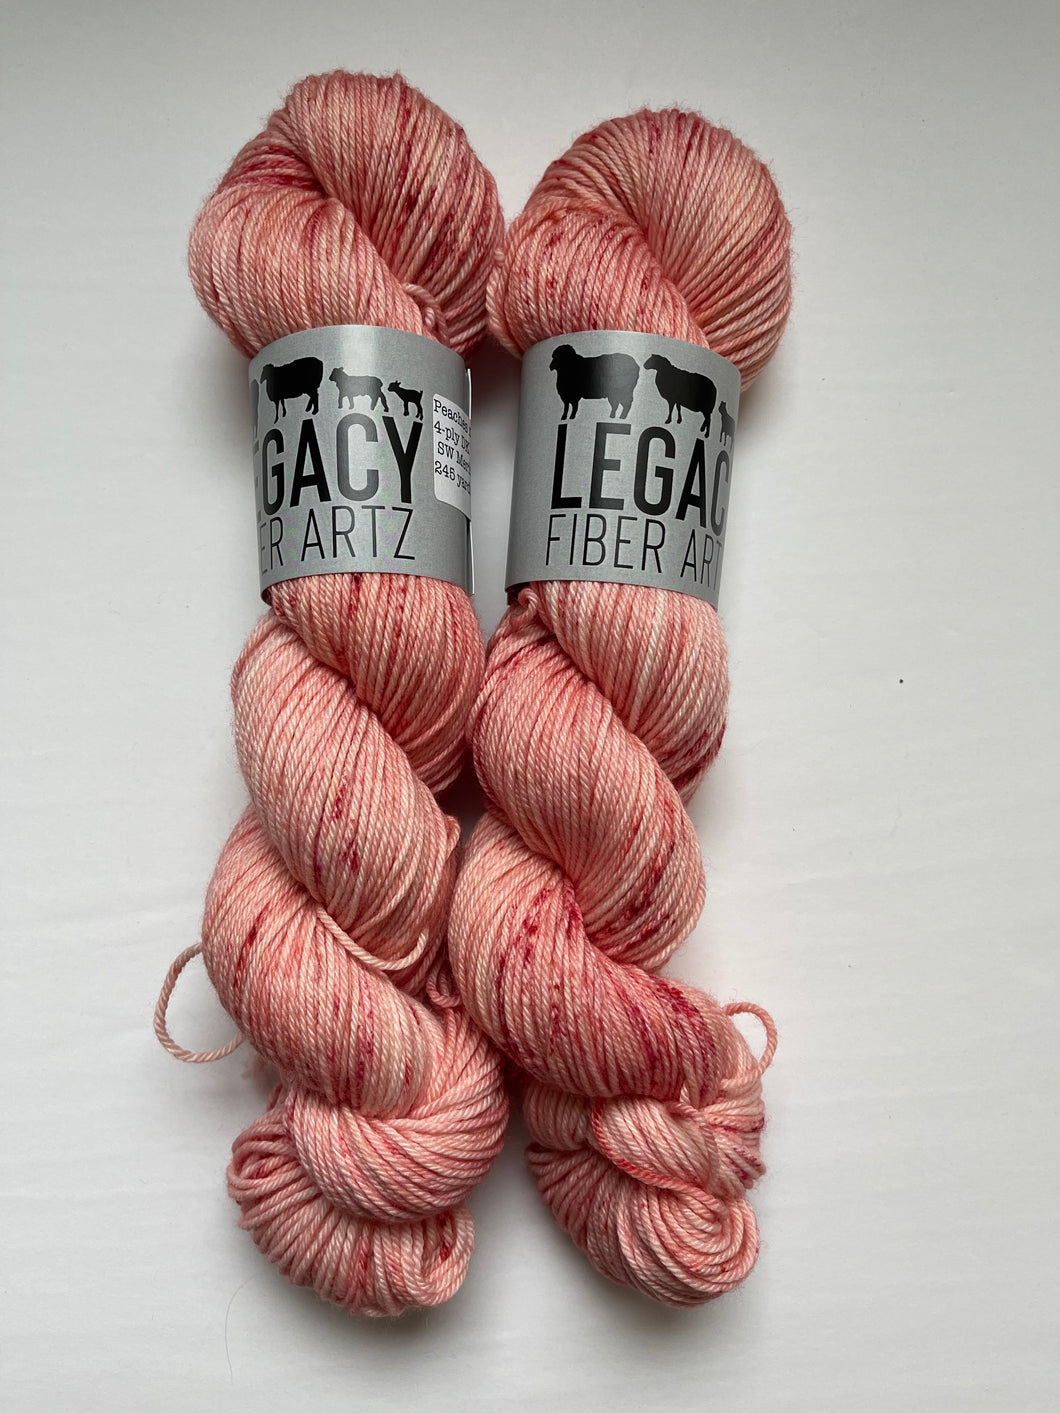 Peaches and Cream Speckled DK